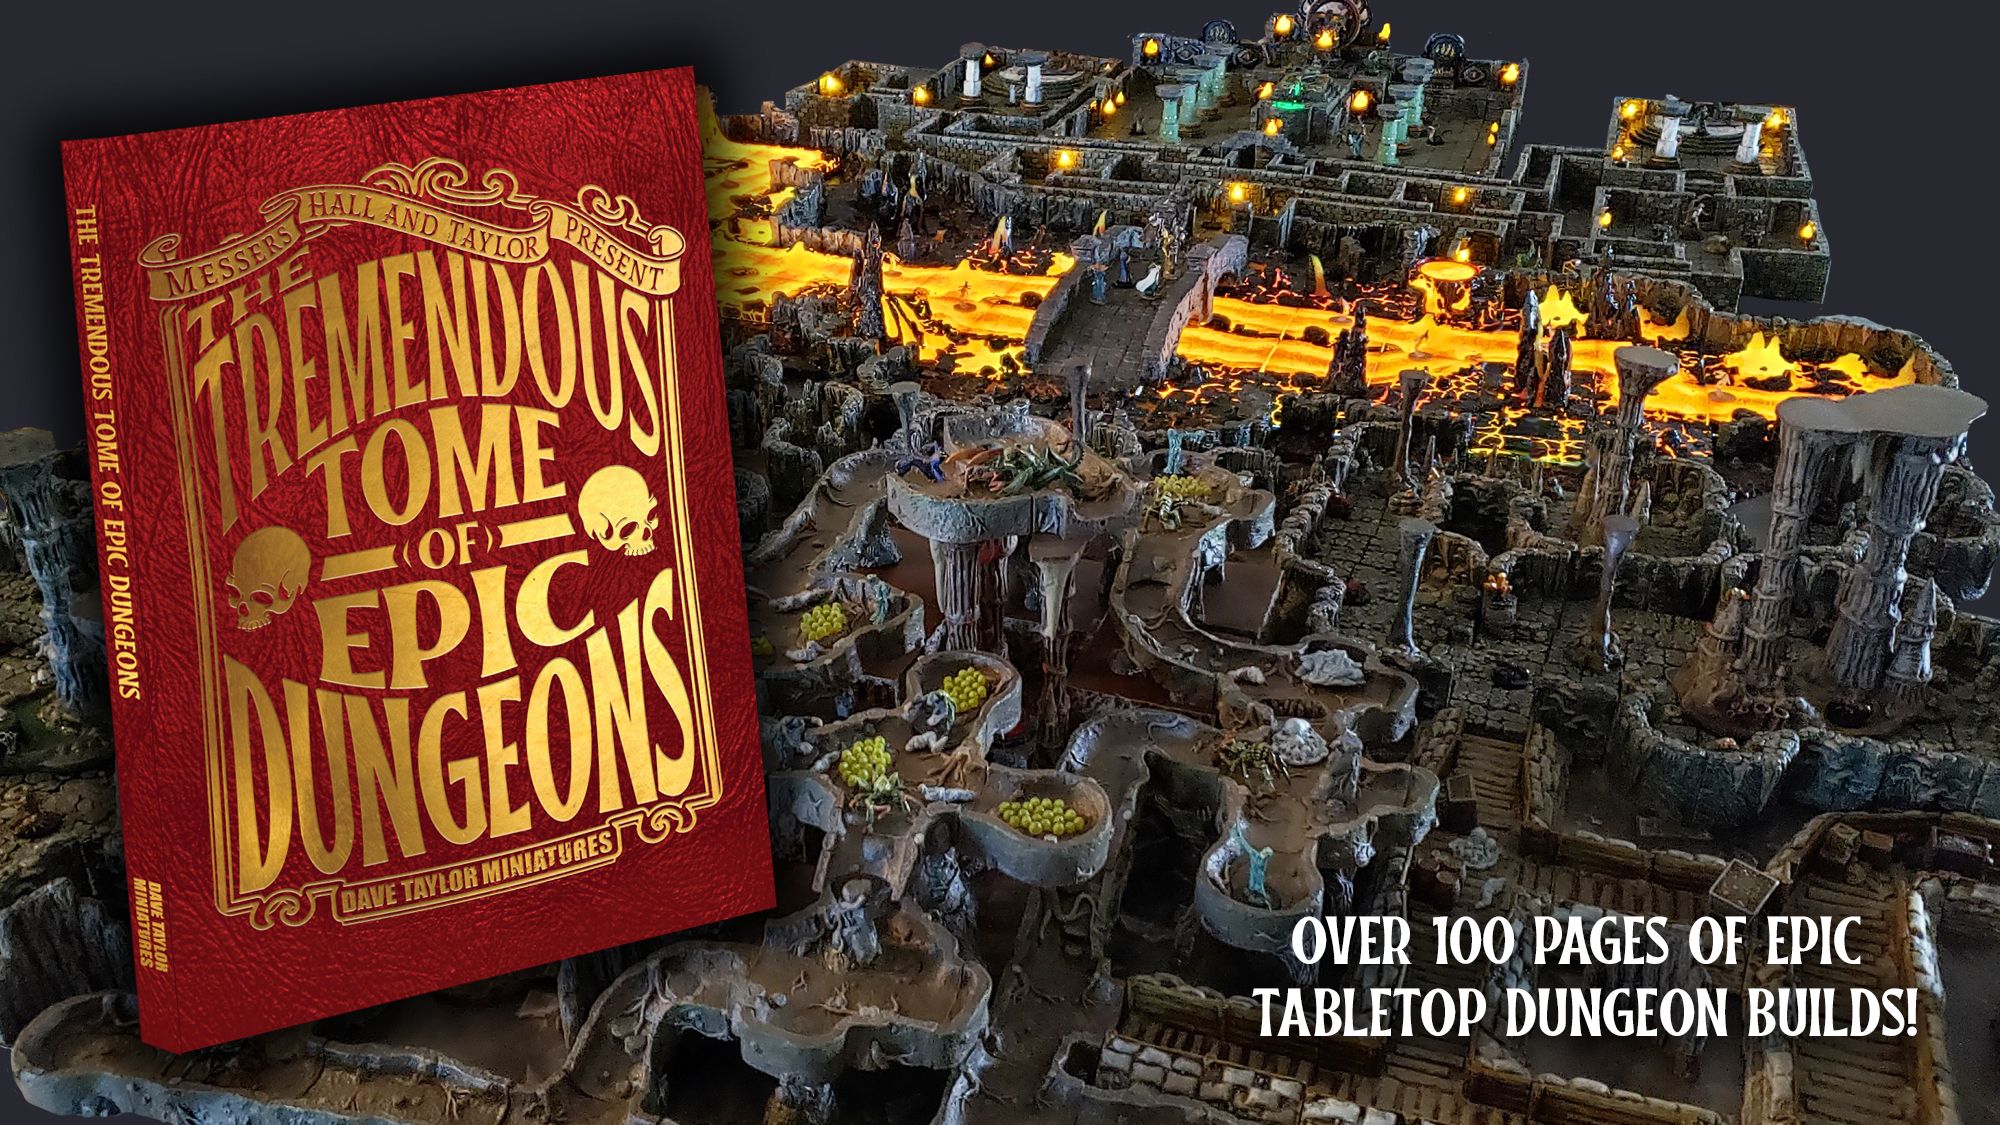 The Tremendous Tome Of Epic Dungeons #2 - Dave Taylor Miniatures